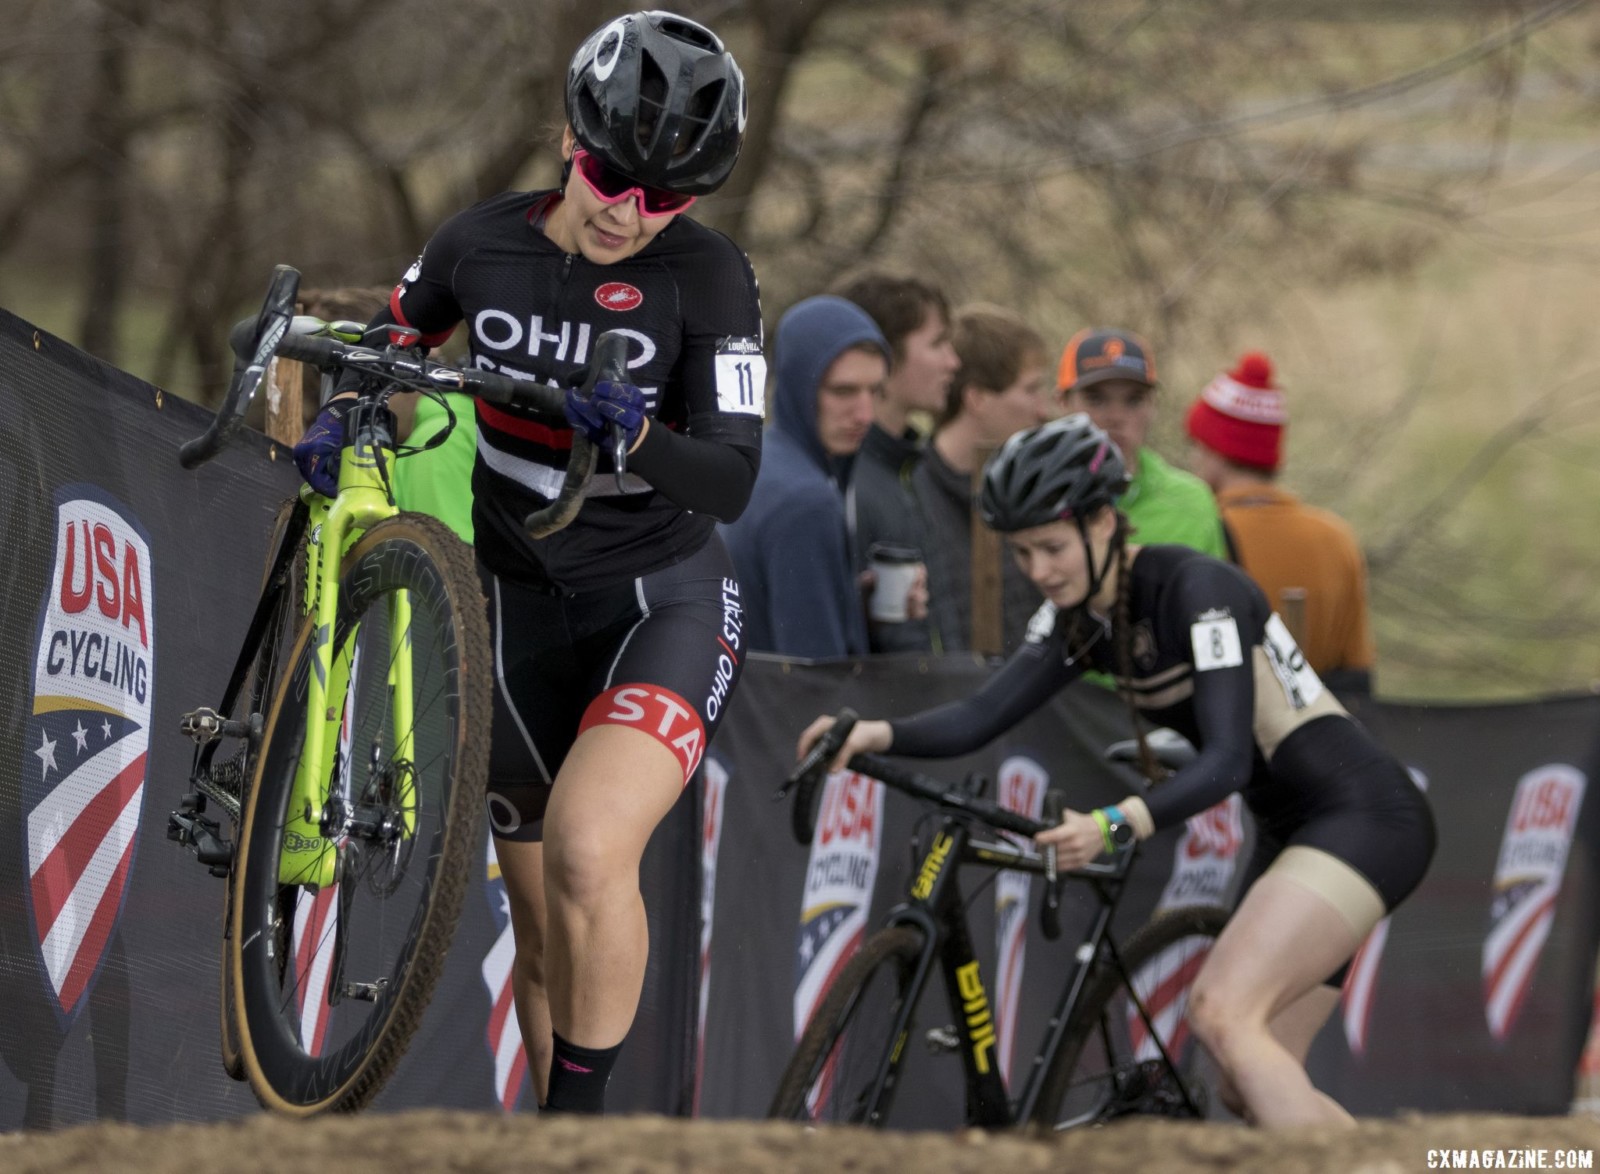 Emily Dreyer finished 12th in her return to Collegiate racing. Collegiate Club Women. 2018 Cyclocross National Championships, Louisville, KY. © A. Yee / Cyclocross Magazine